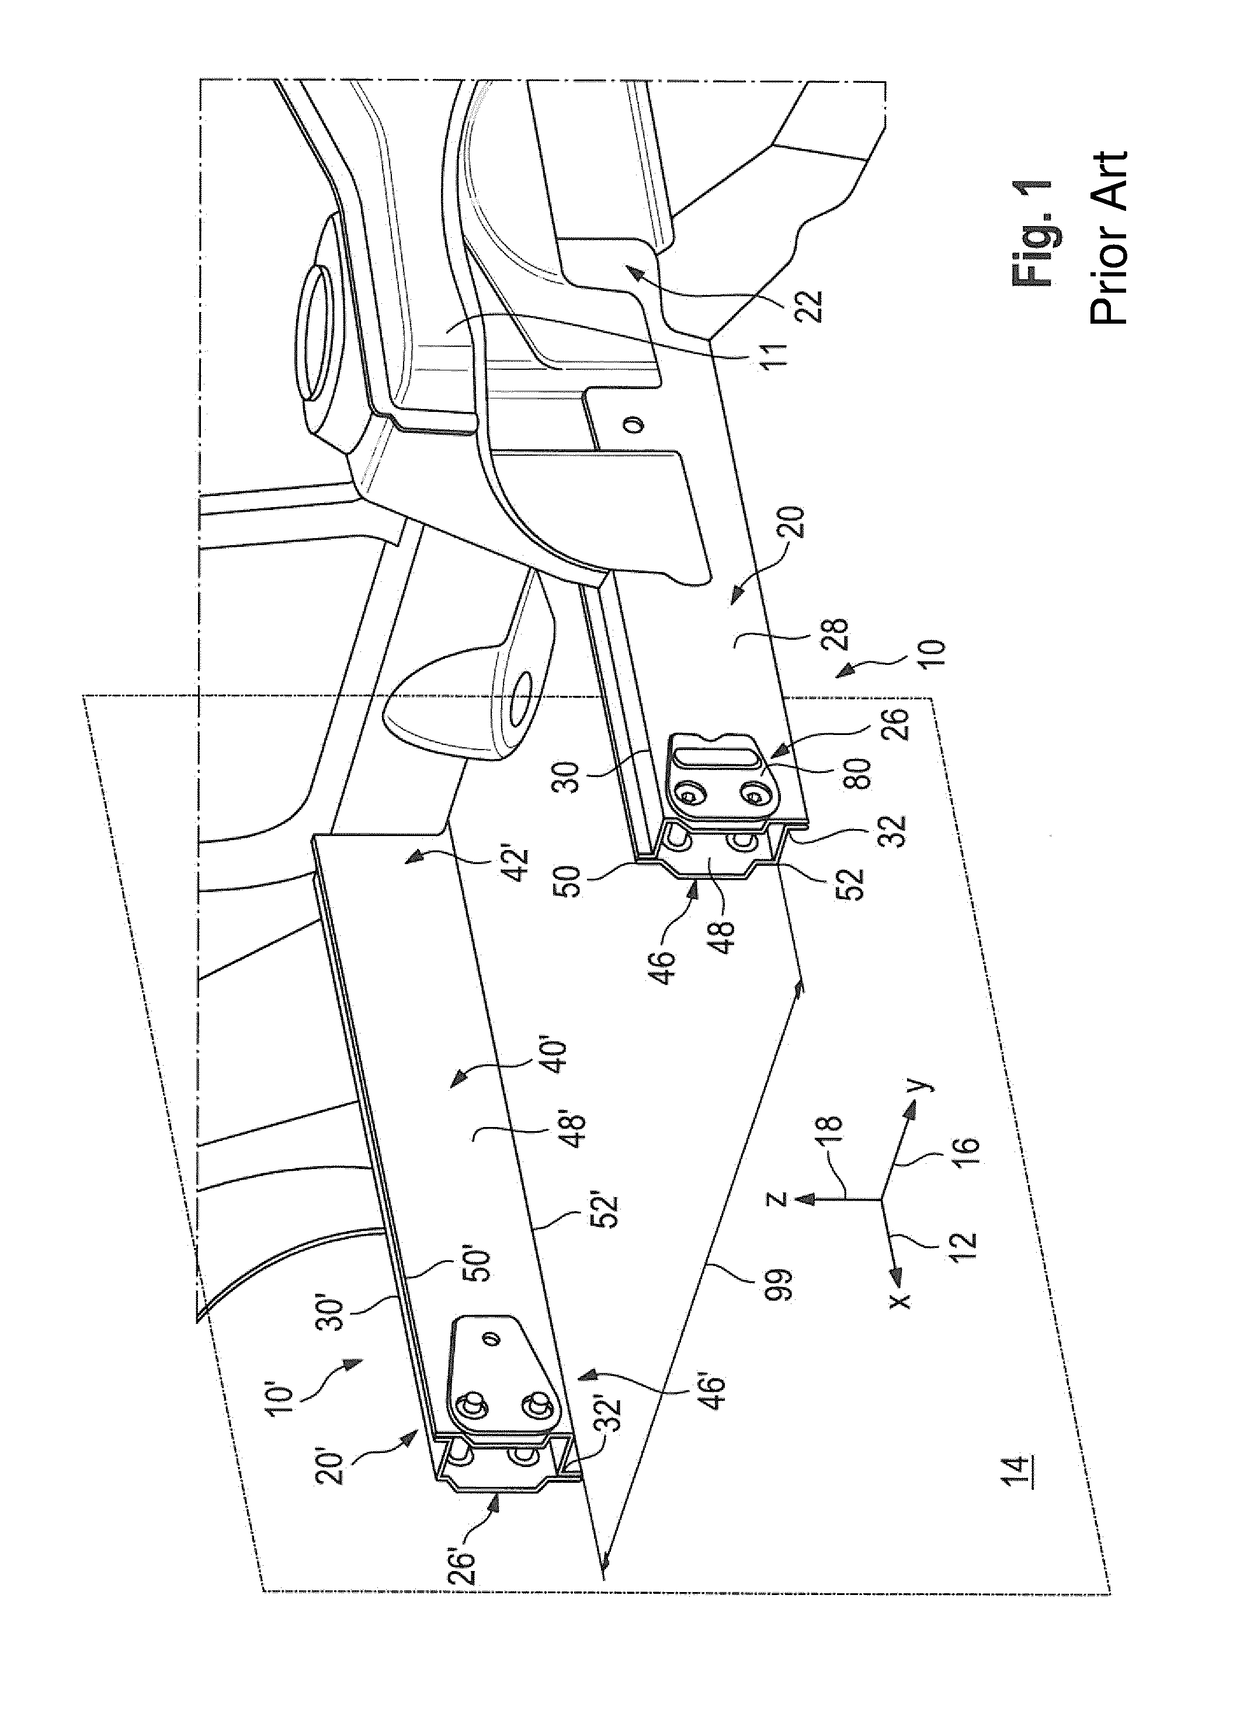 Longitudinal Support Device for Supporting a Front Engine in a Motor Vehicle